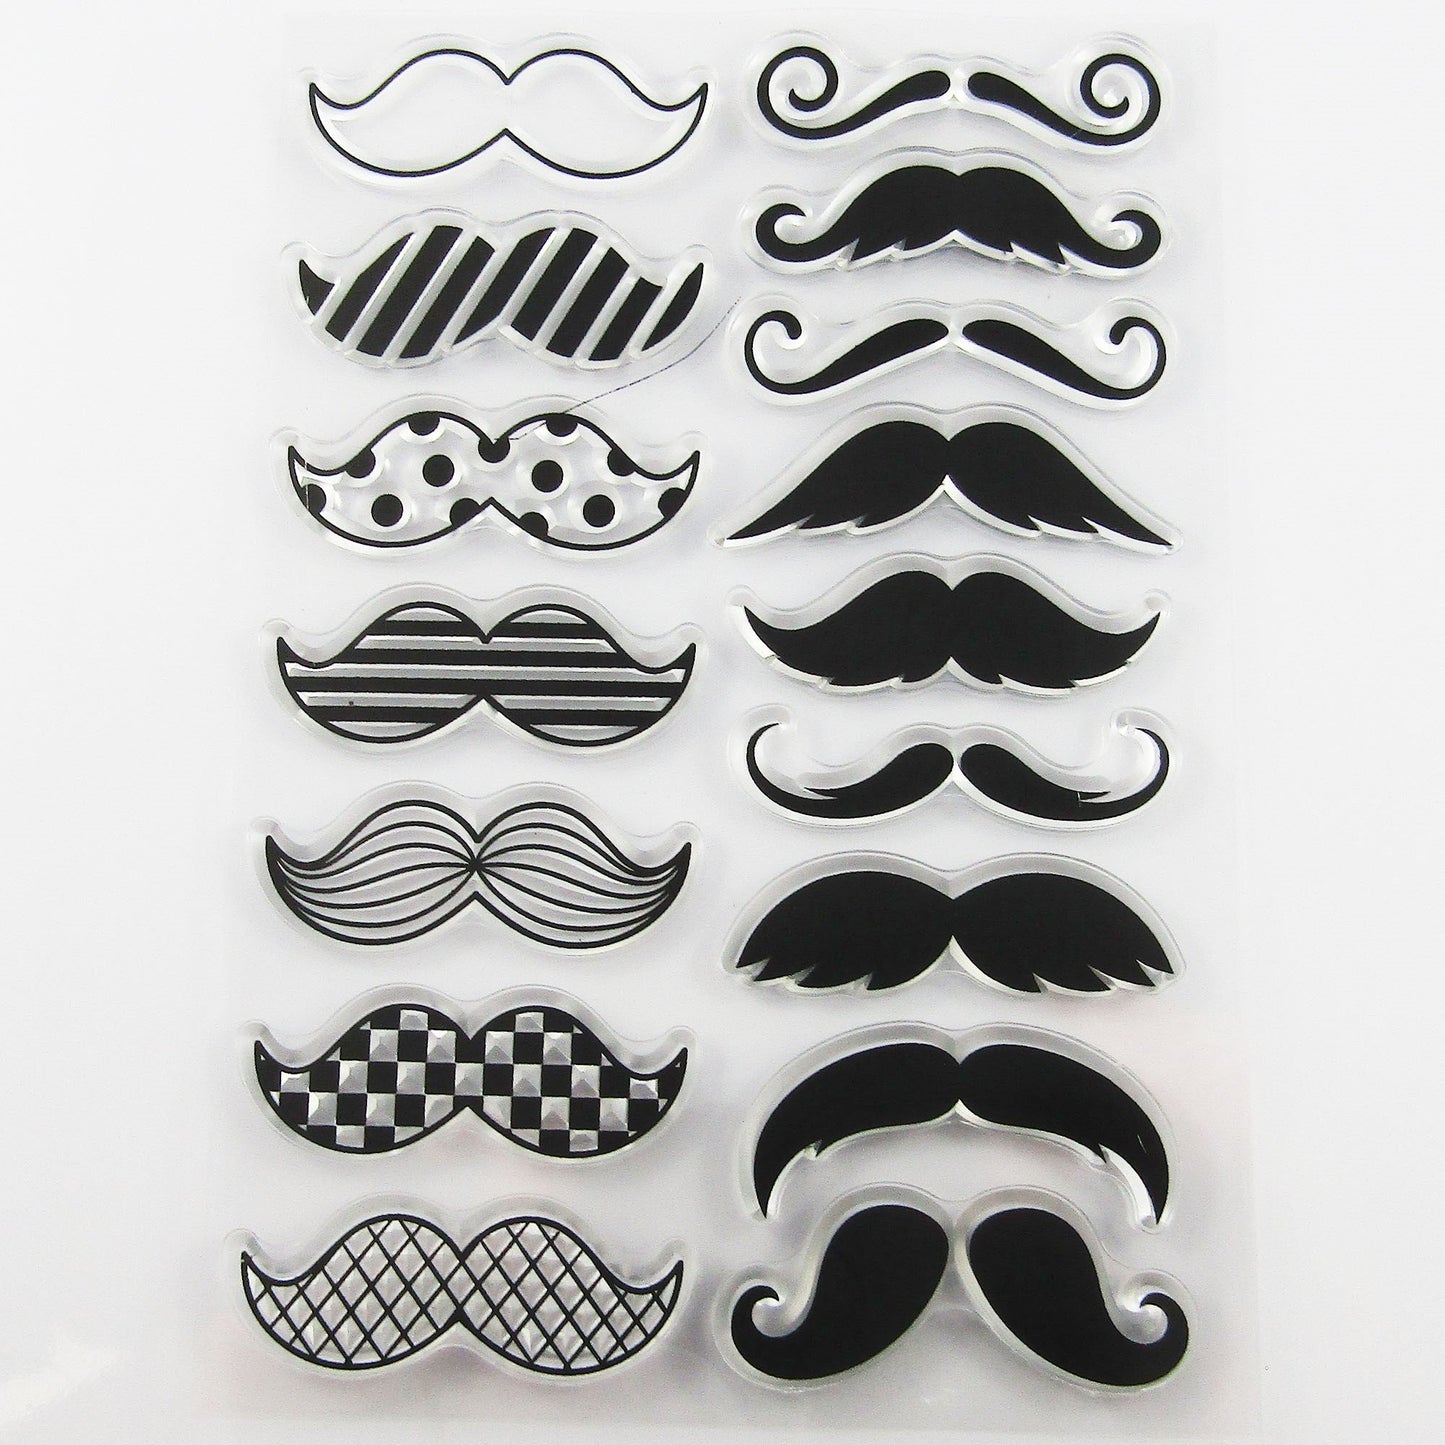 Movember Moustache Mo's Clear Stamp Sheet Silicone Journal Scrapbook Cards